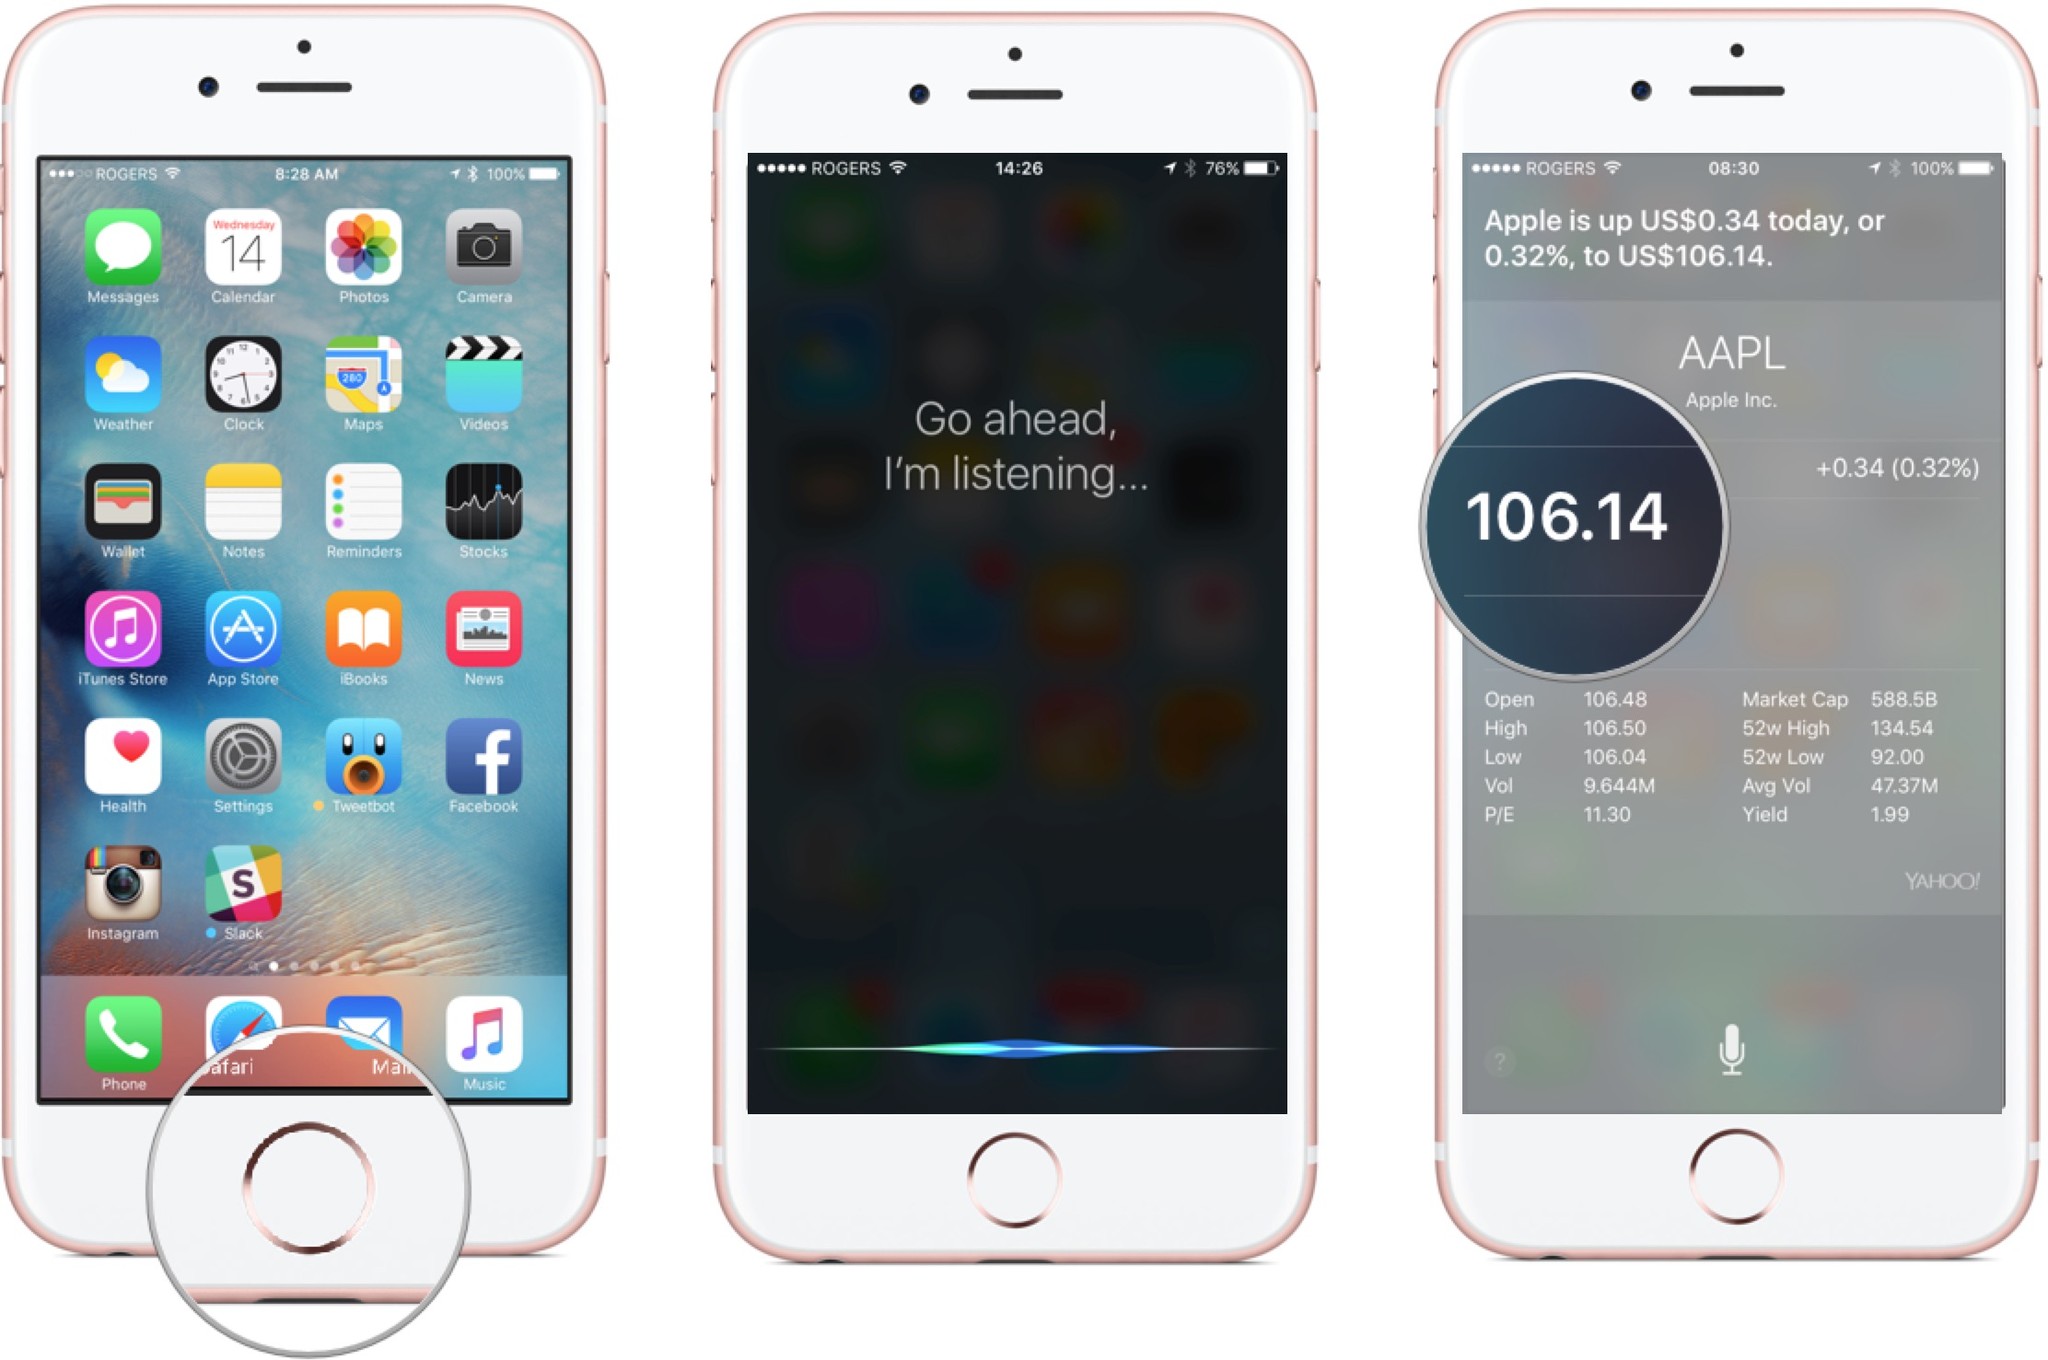 Hold down the Home button, ask Siri about a specific stock, tap on the widget to go to the app.